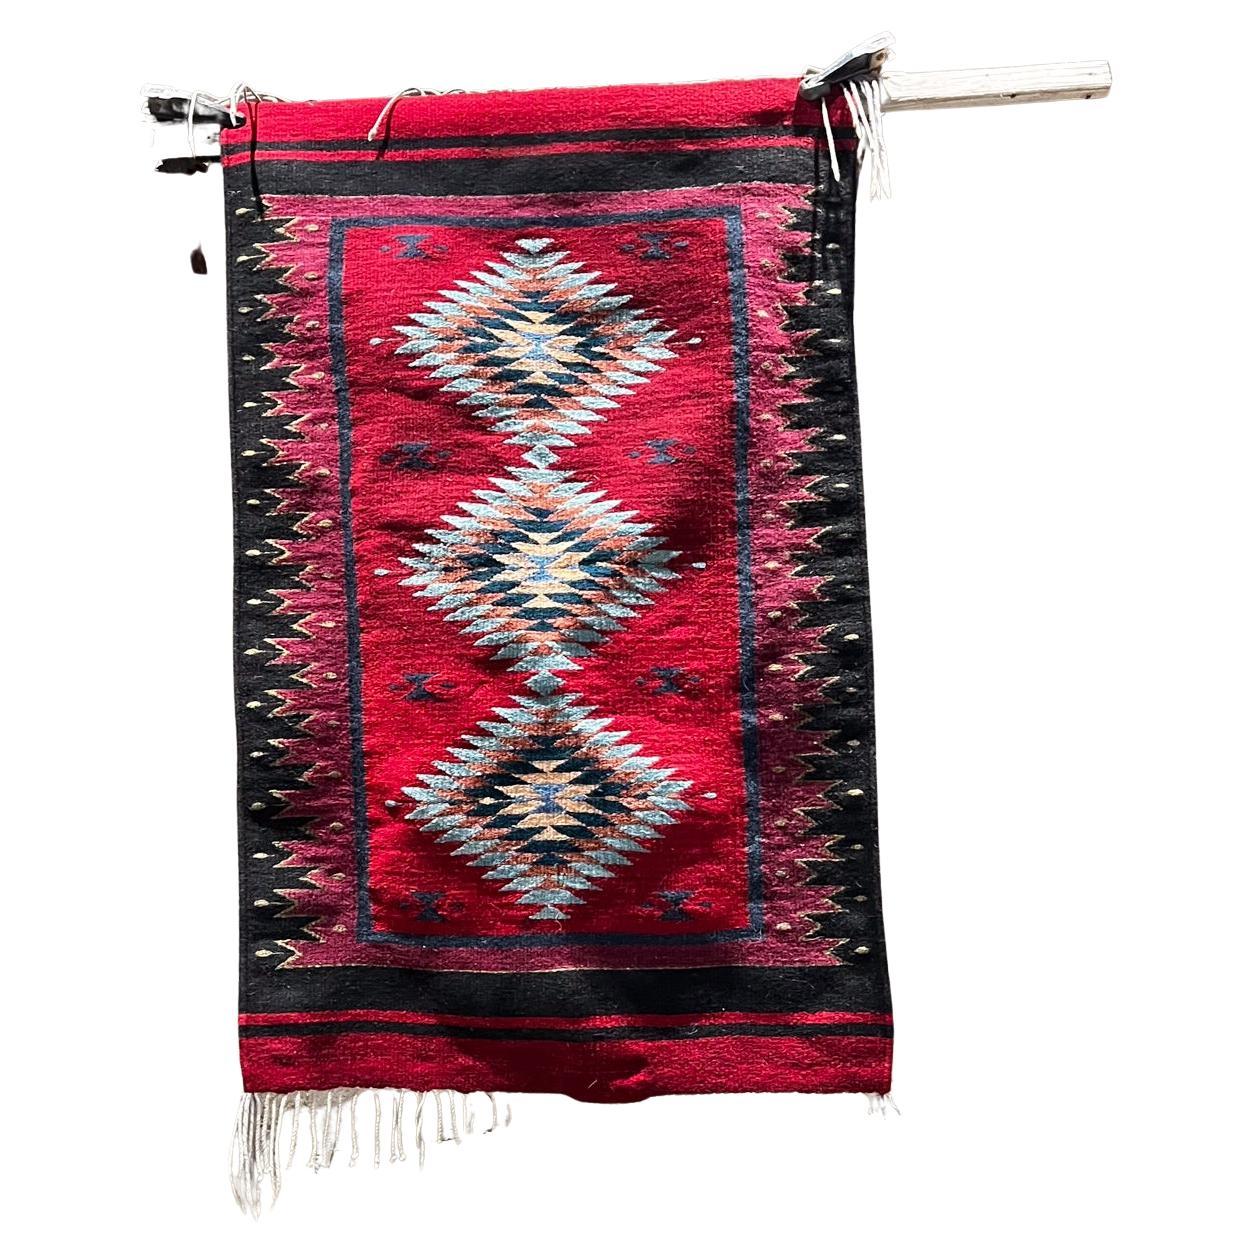 Native Navajo Style Wall Art Tapestry Colorful Black Pink Red For Sale